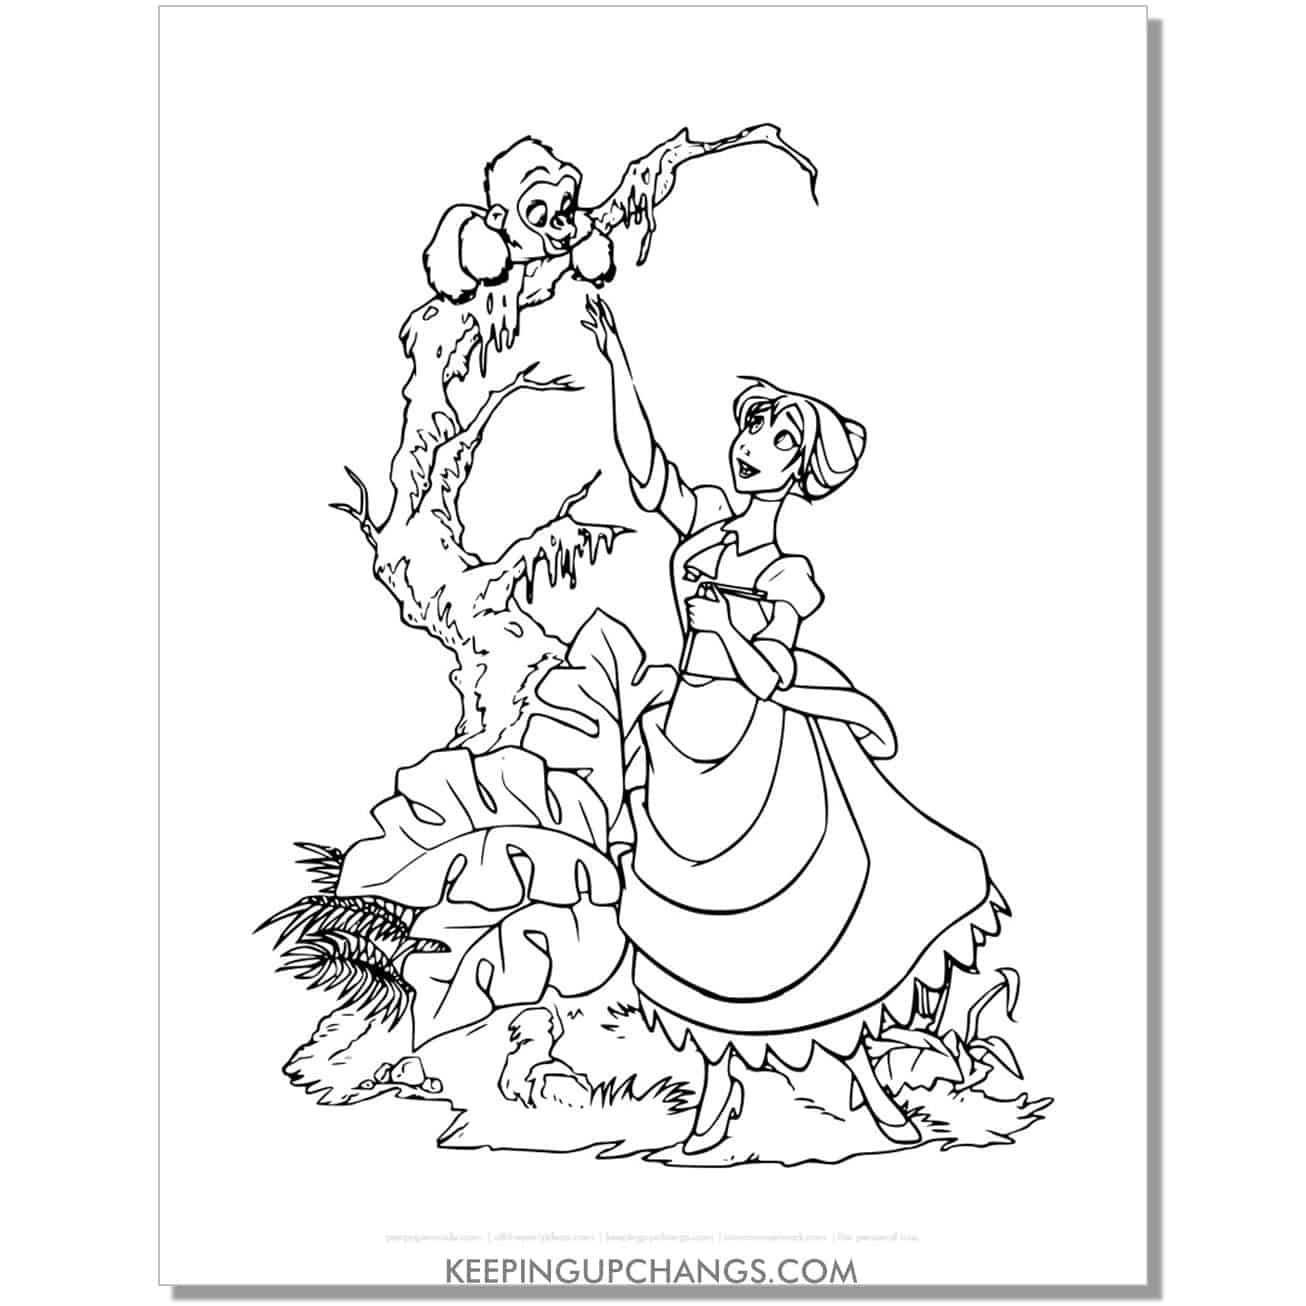 free jane porter with baby ape tarzan coloring page, sheet.